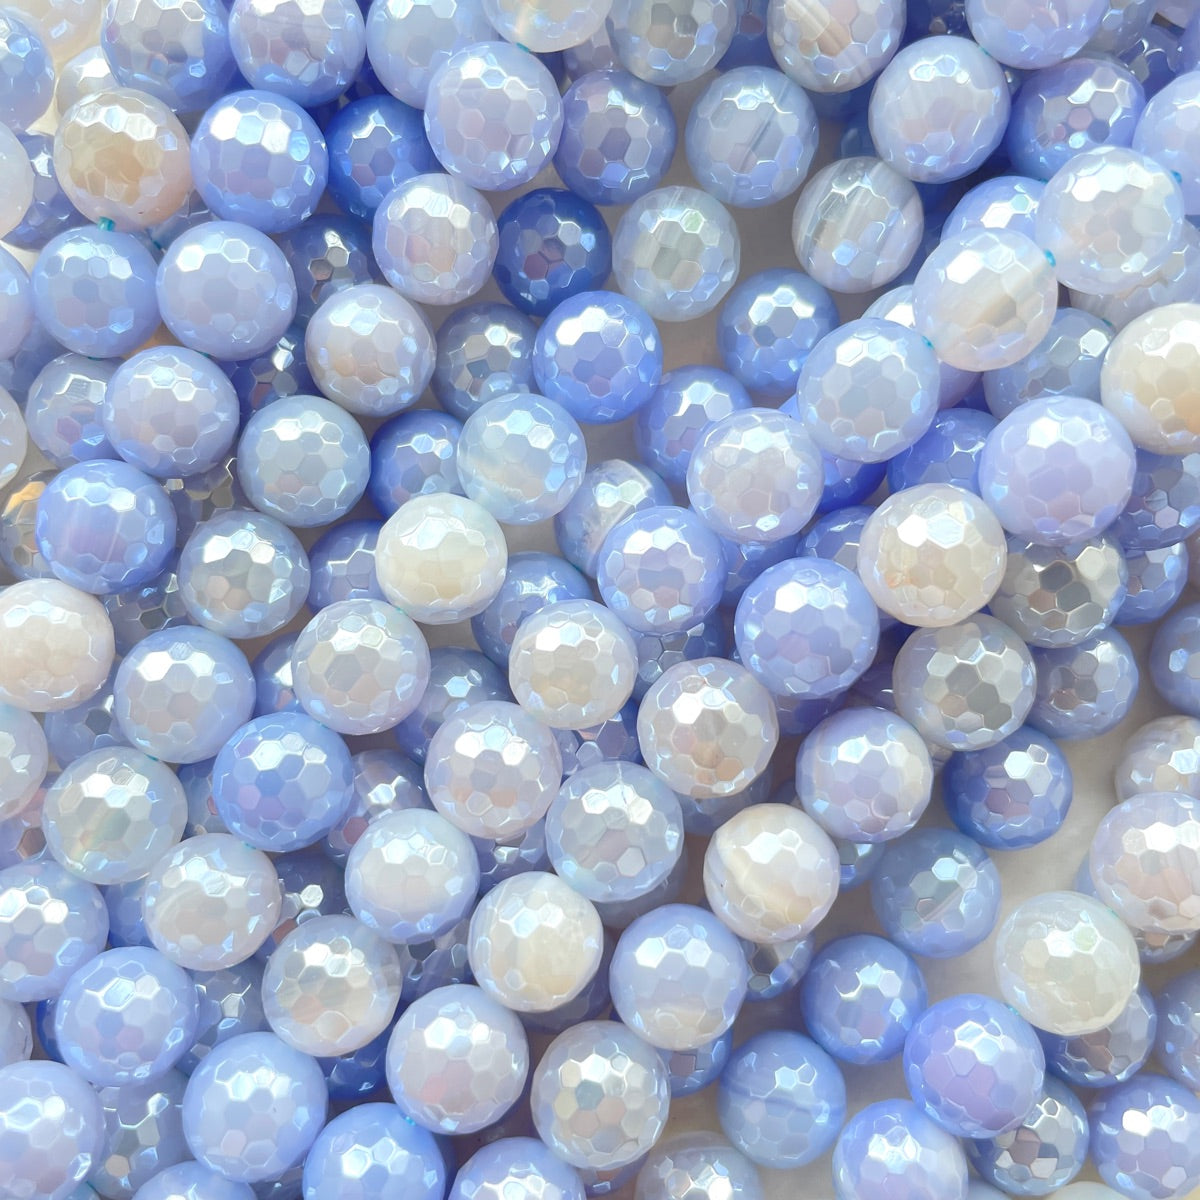 10mm Electroplated Blue Agate Stone Faceted Beads-Grade A Premium Quality Electroplated Beads New Beads Arrivals Premium Quality Agate Beads Charms Beads Beyond